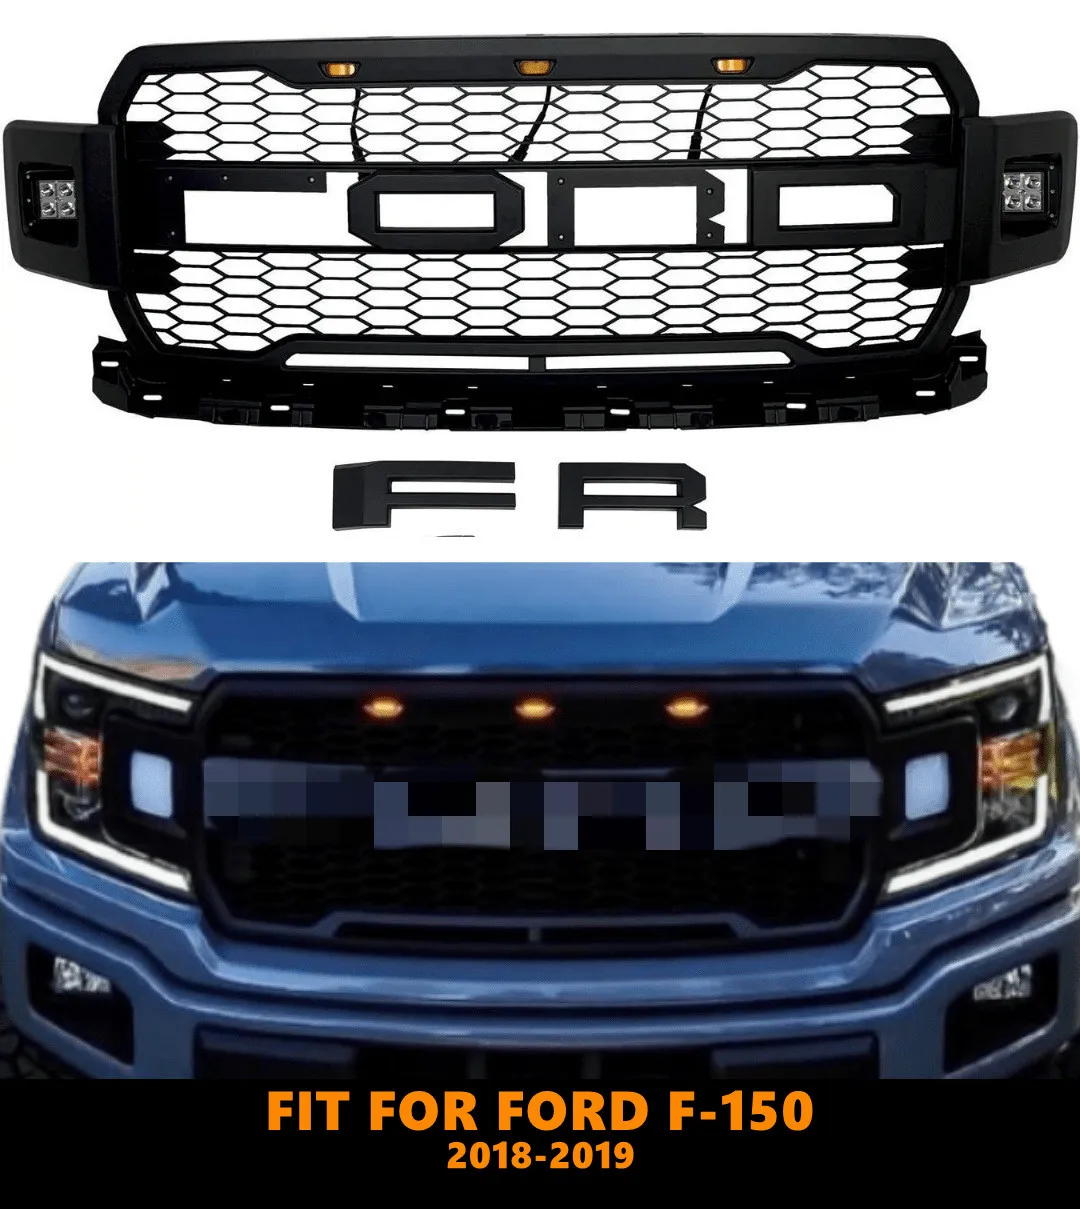 

ABS Black Middle Grille Racing Grills Front Bumper Grill With Amber Lights For Ford F-150 2018 2019